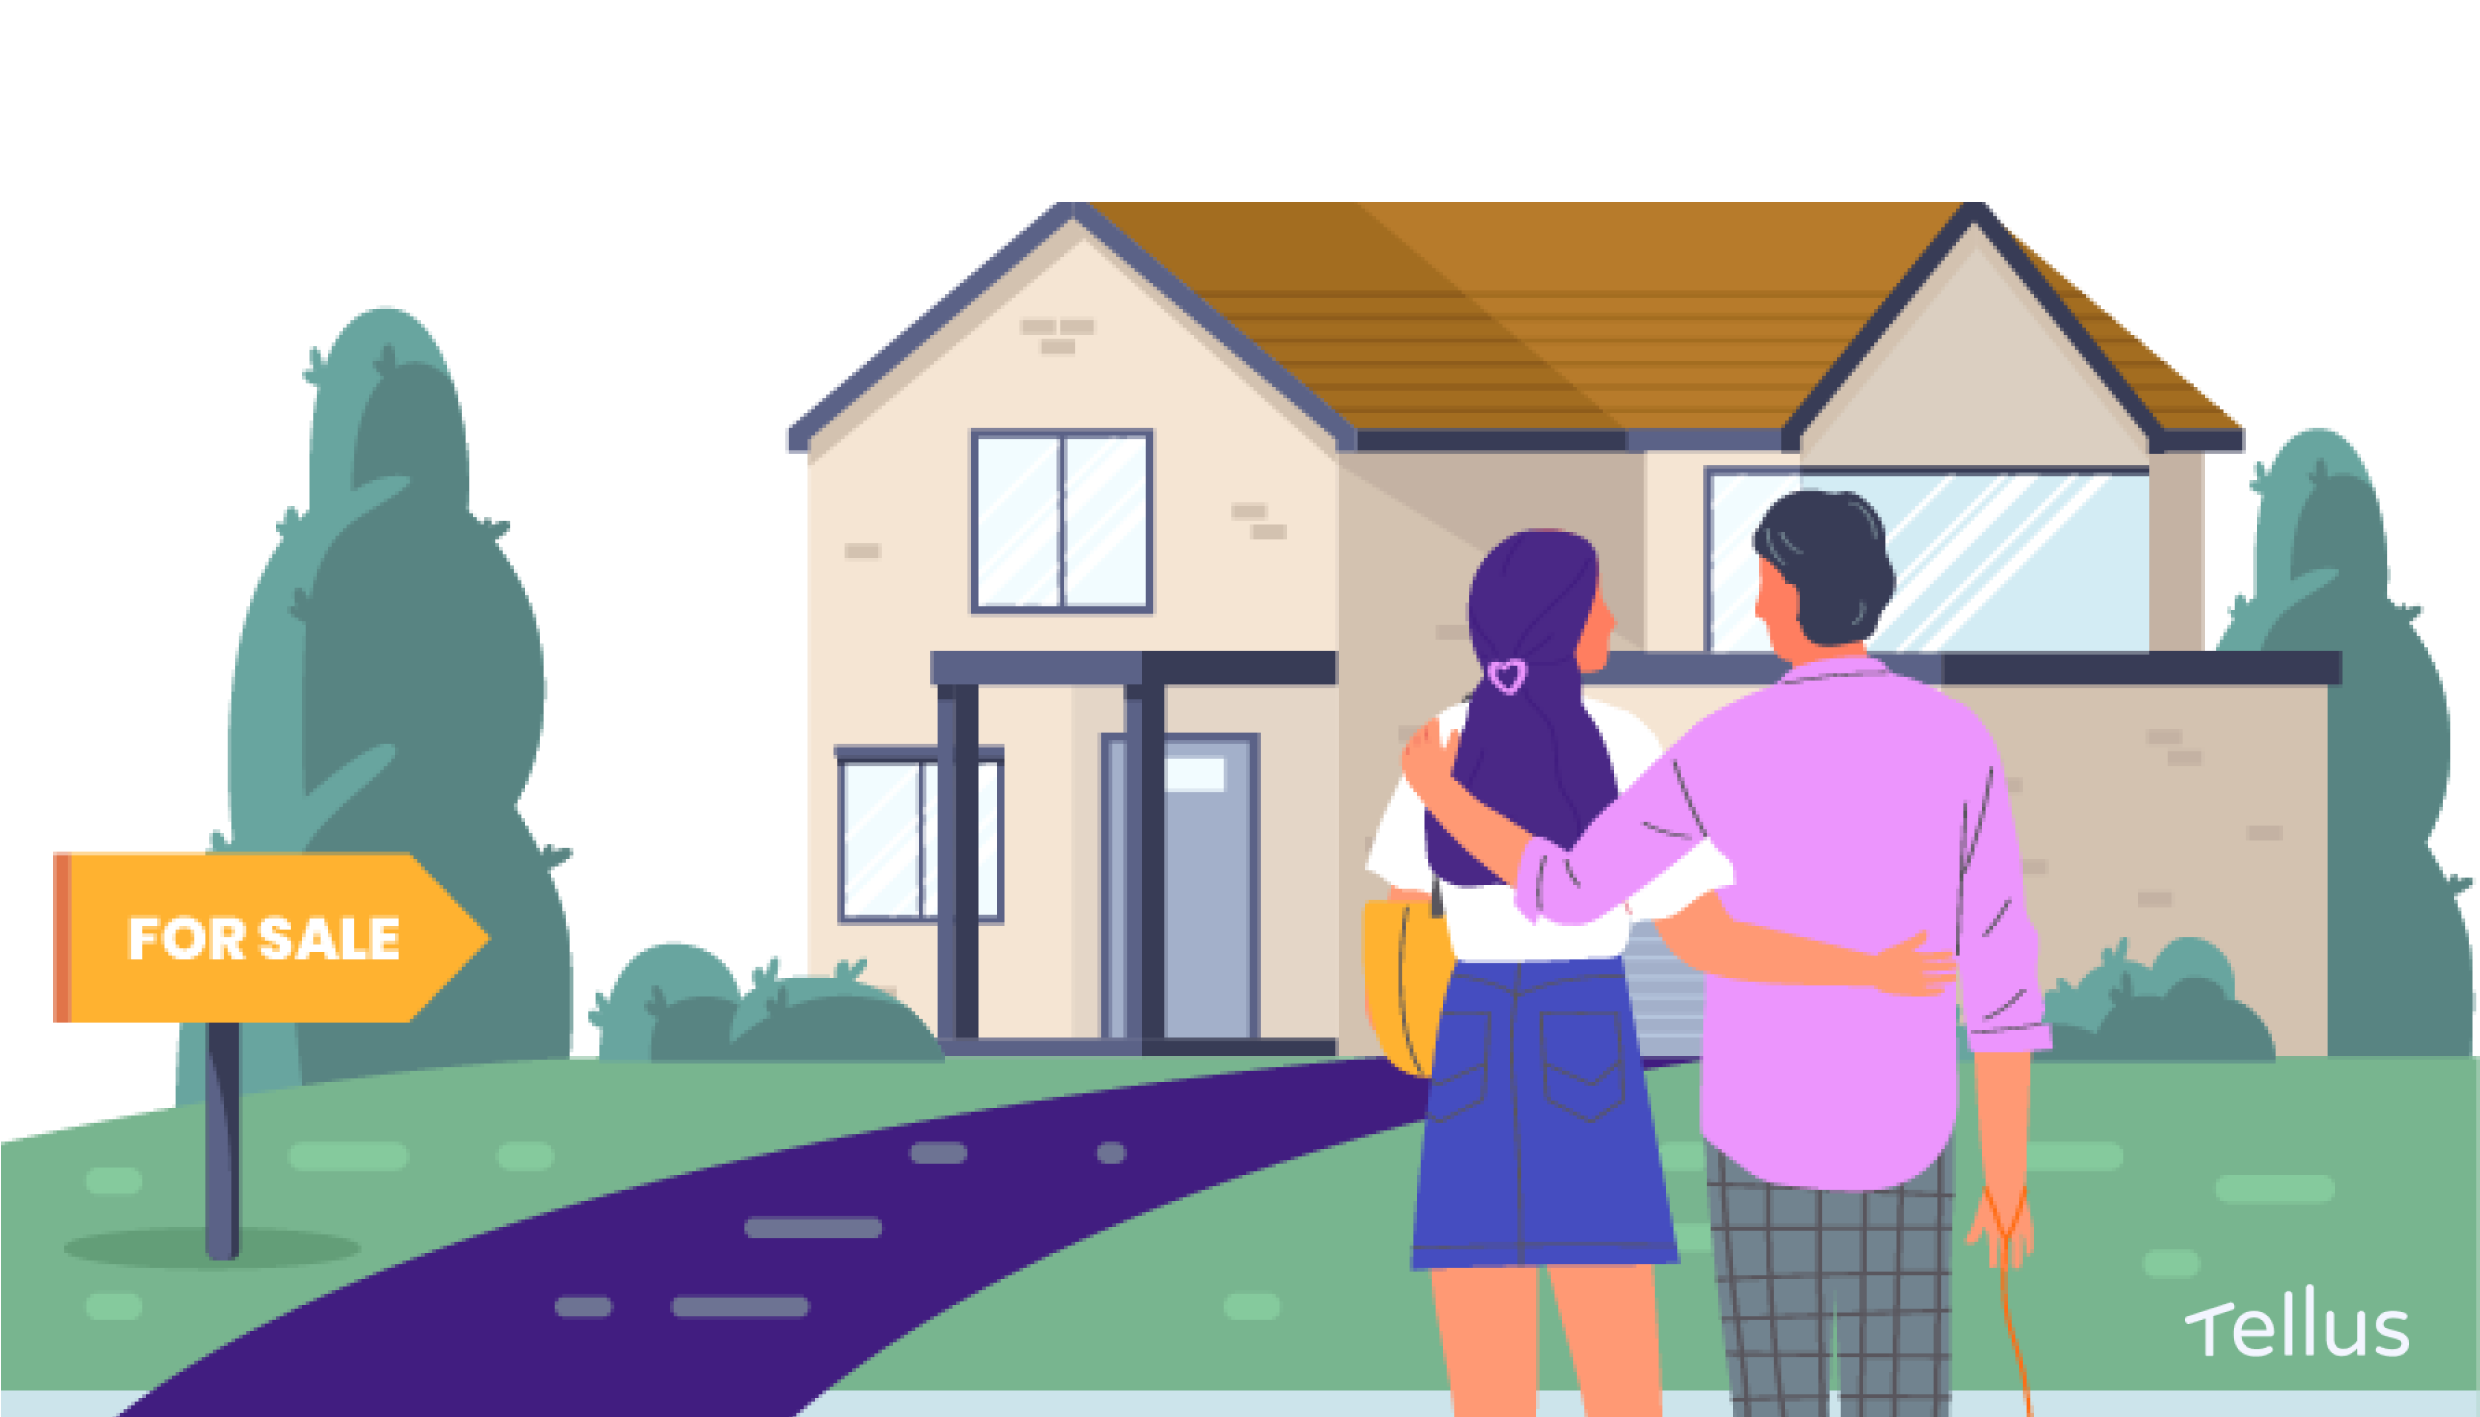 Illustration of couple standing outside house for sale